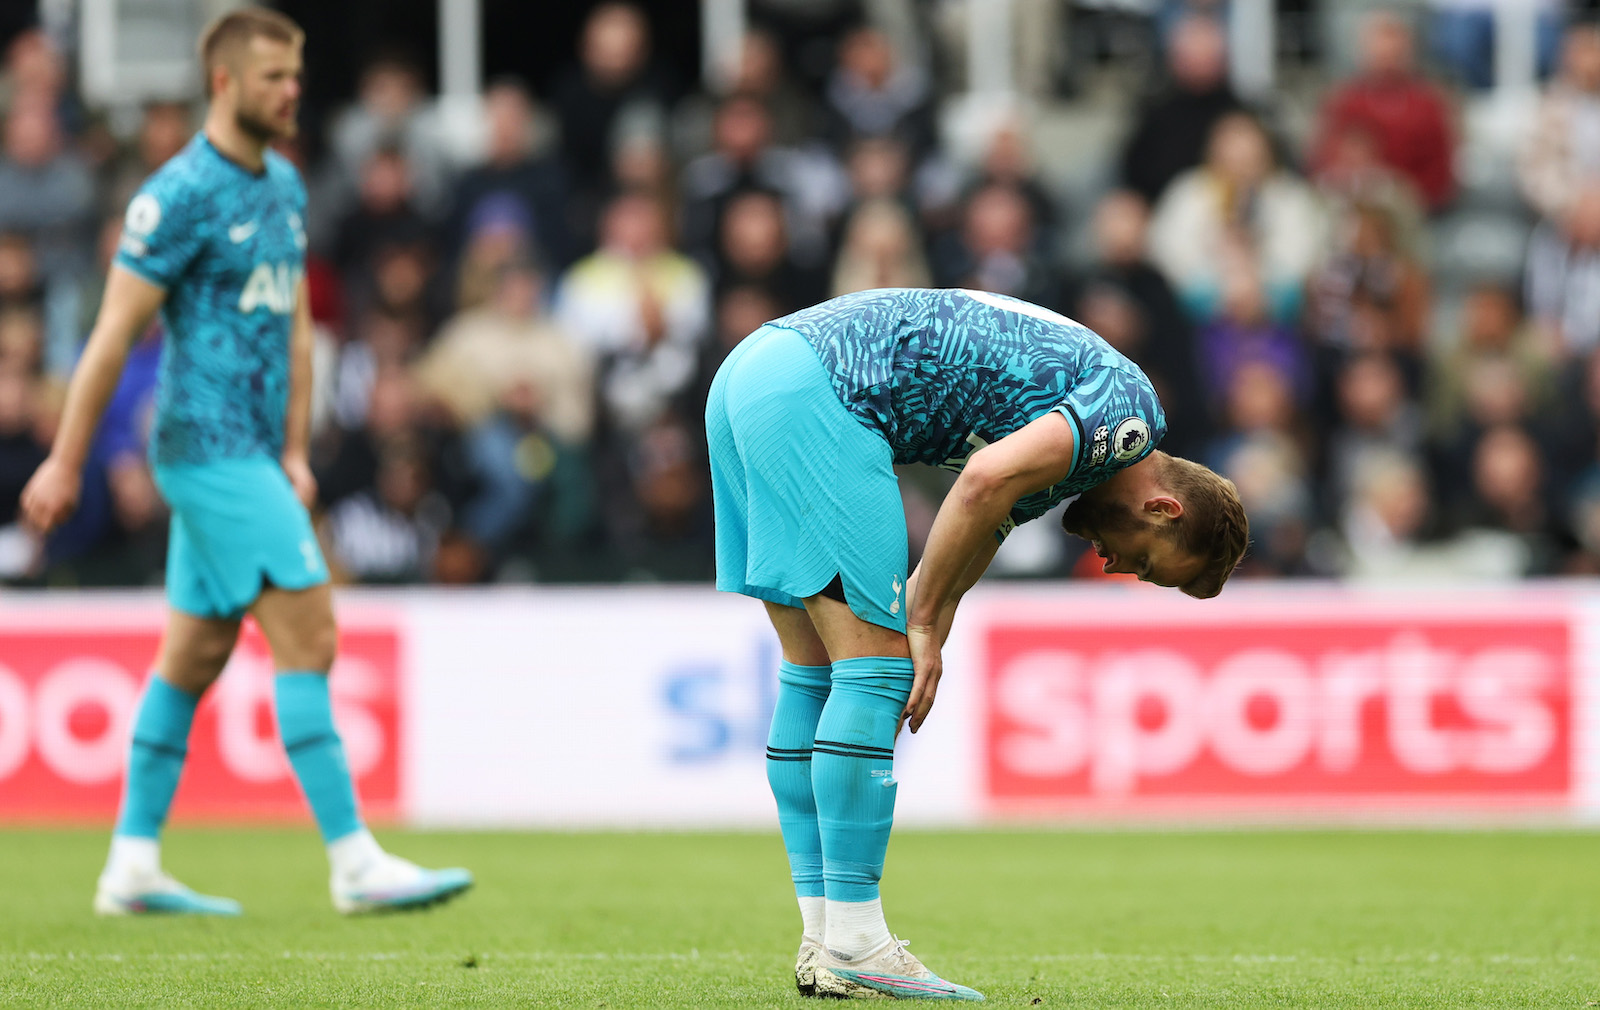 NEWCASTLE UPON TYNE, ENGLAND - APRIL 23: Harry Kane of Tottenham Hotspur reacts during the Premier League match between Newcastle United and Tottenham Hotspur at St. James Park on April 23, 2023 in Newcastle upon Tyne, England.